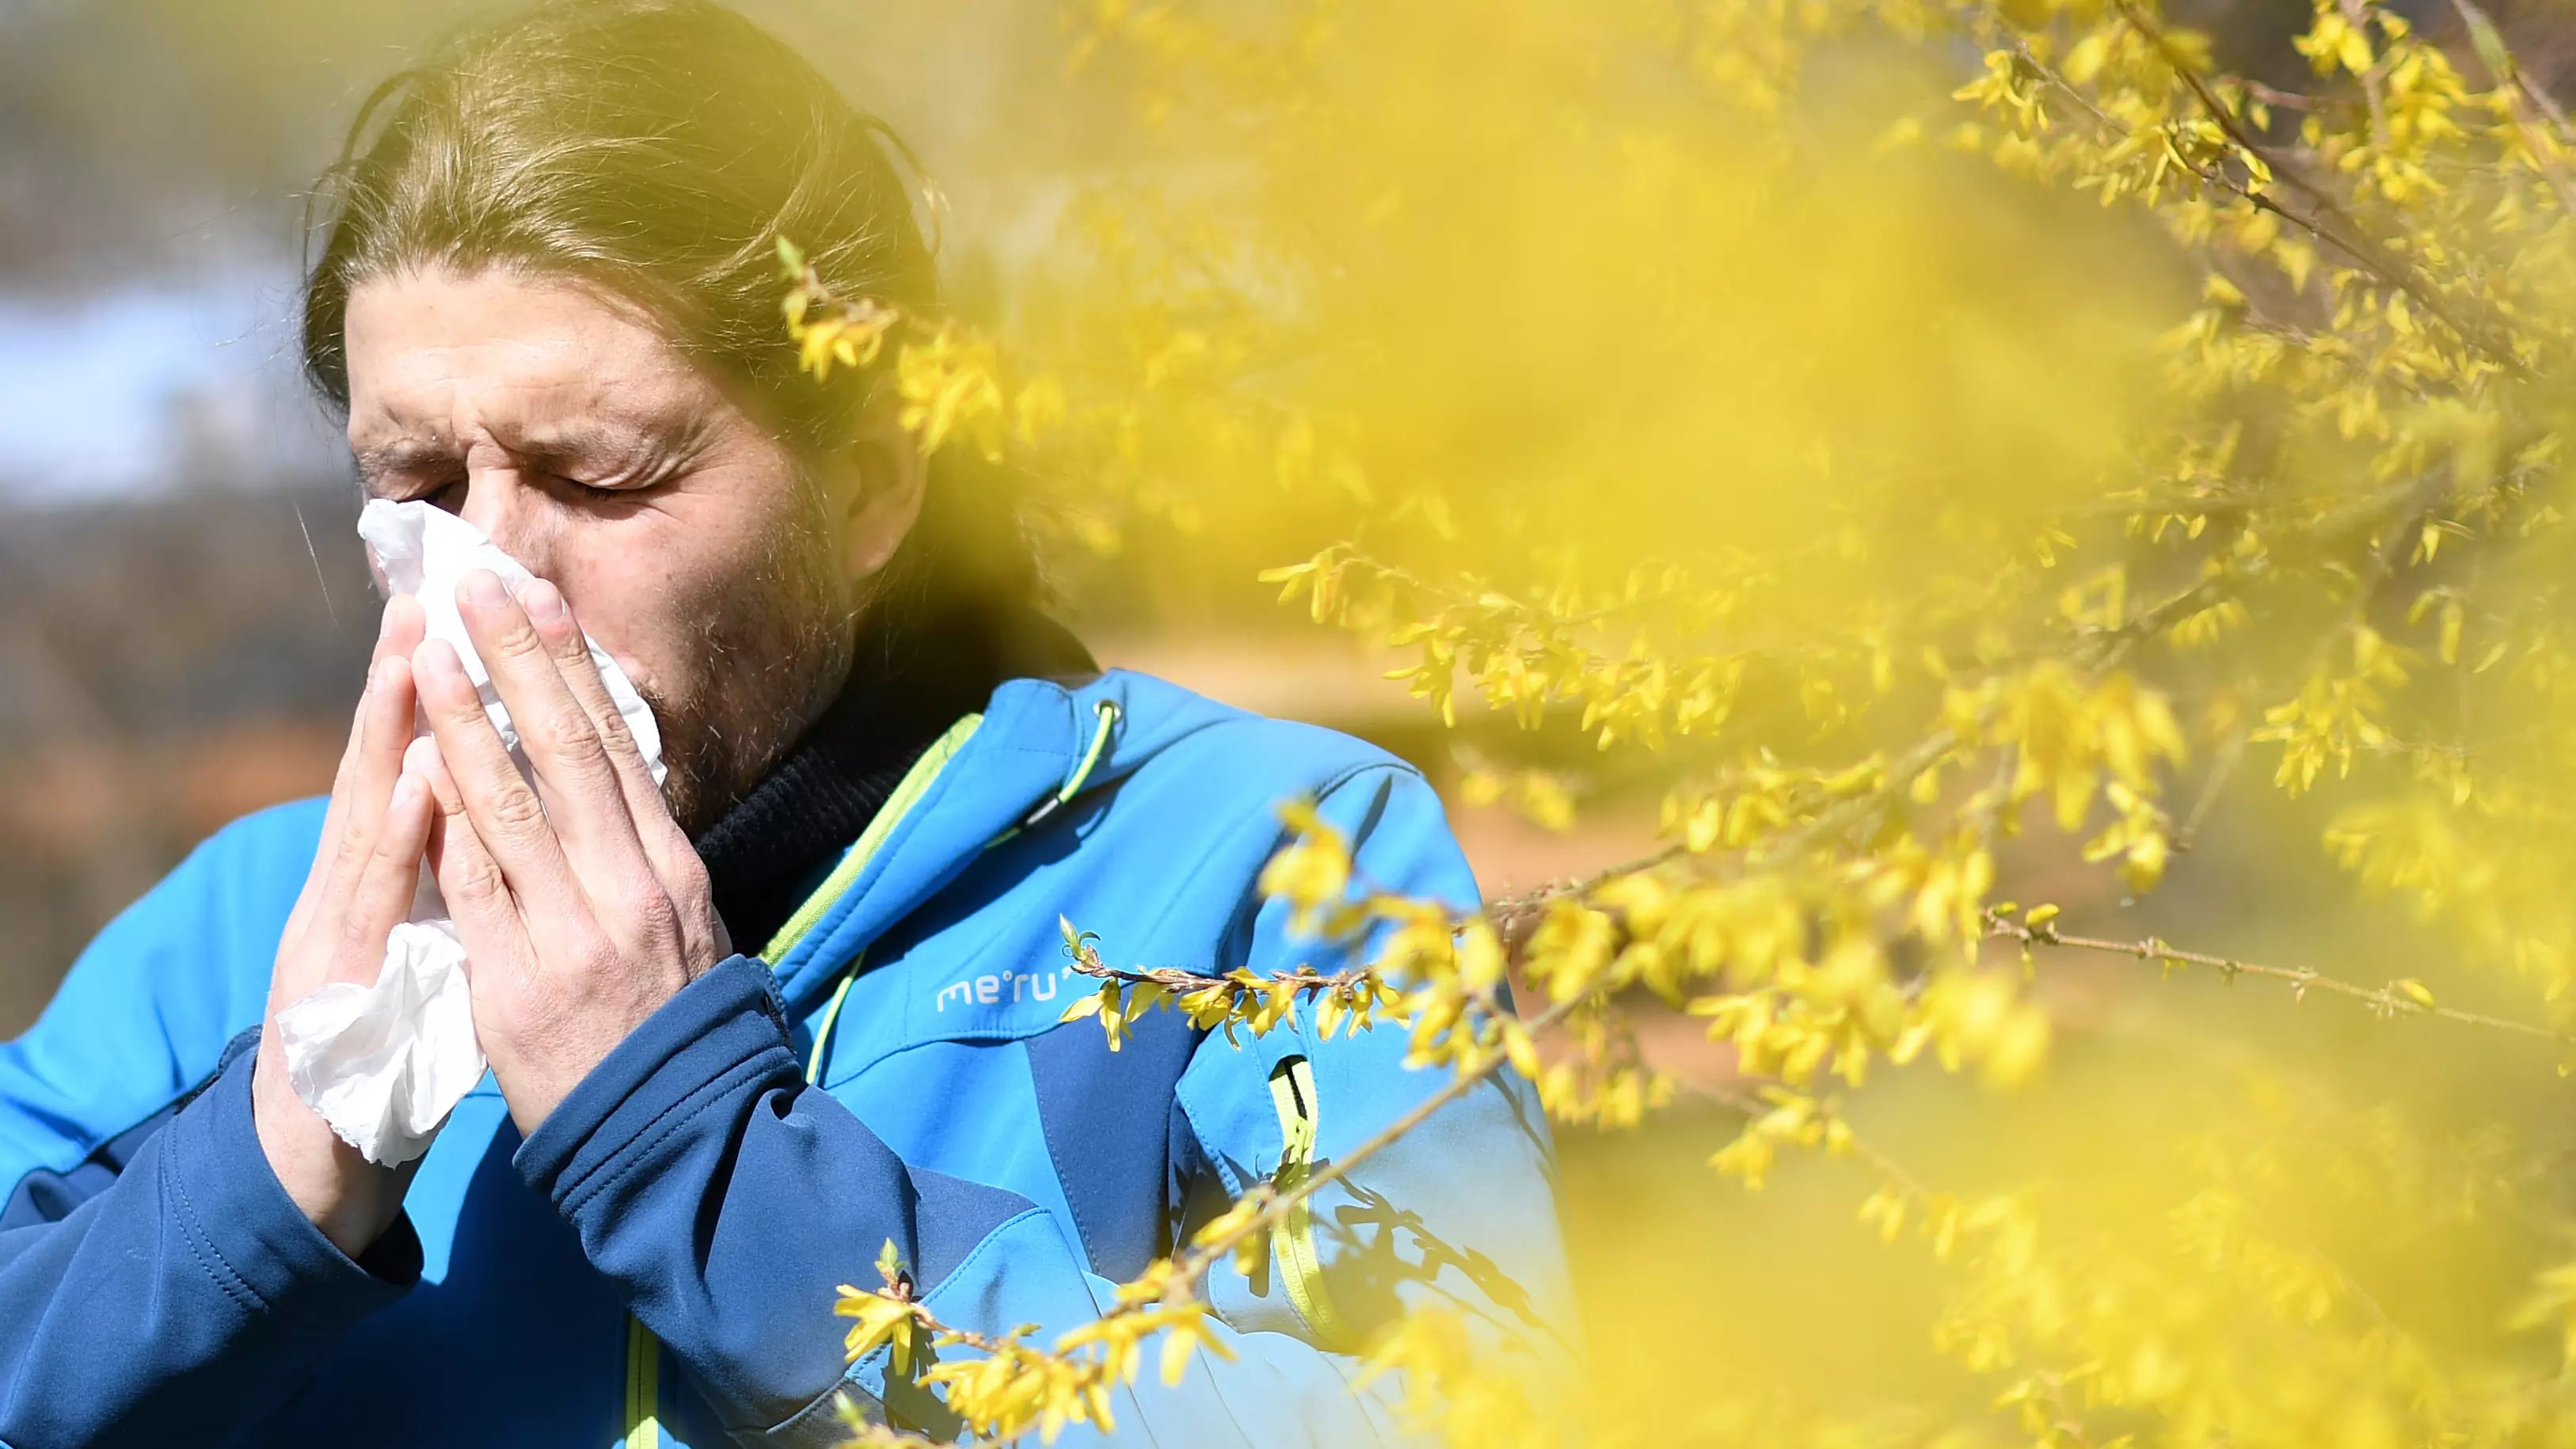 Expert Explains Why Your Hay Fever Feels Worse This Year